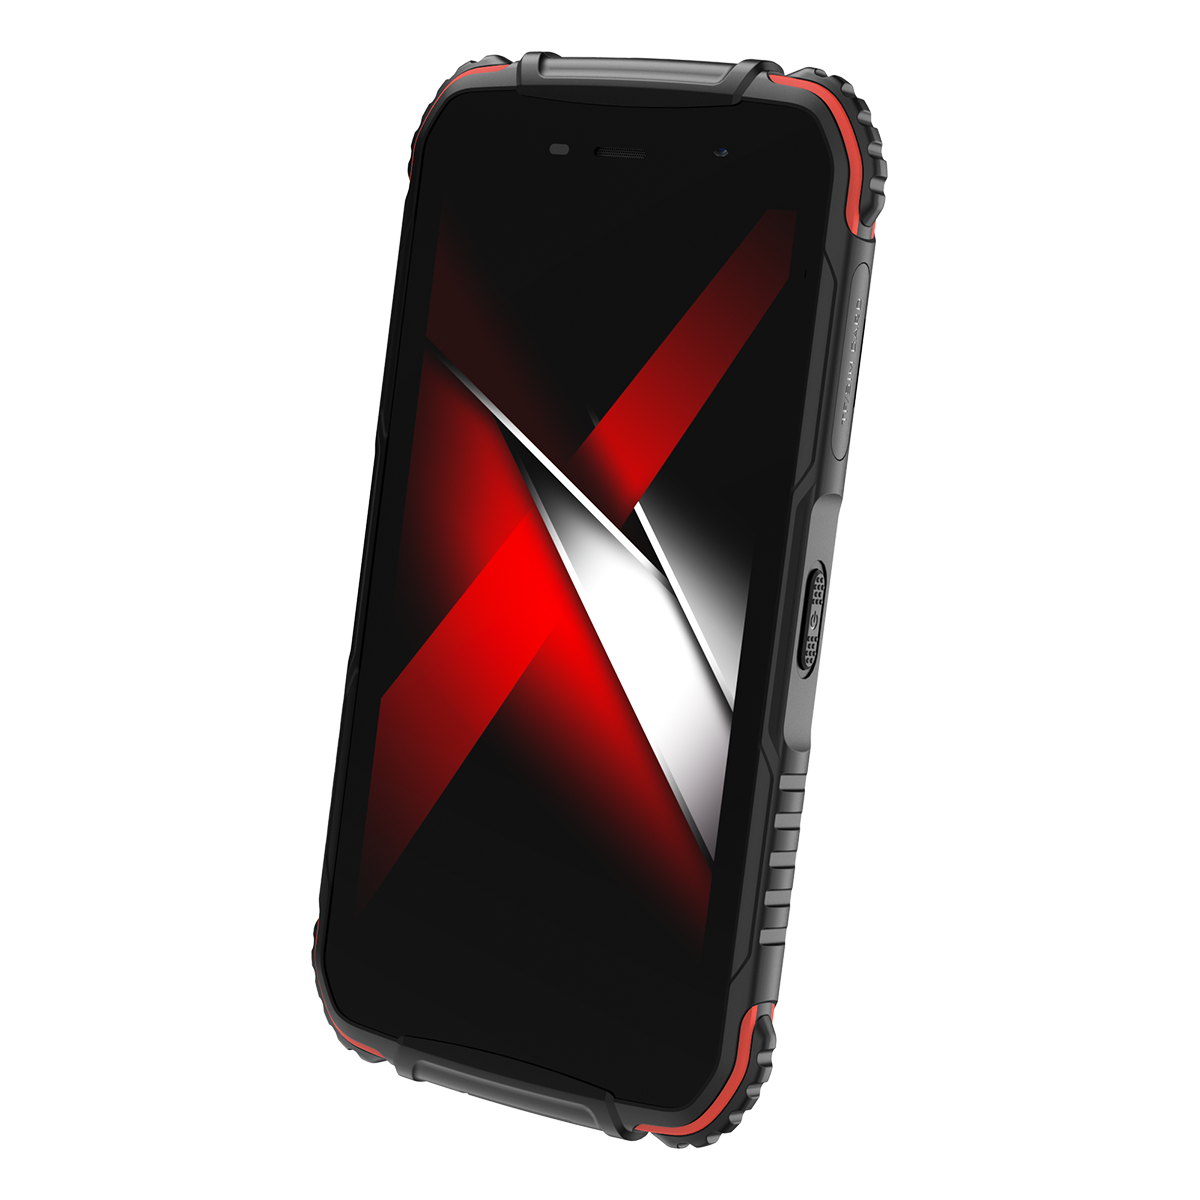 Doogee S35 2GB/16GB Flame Red